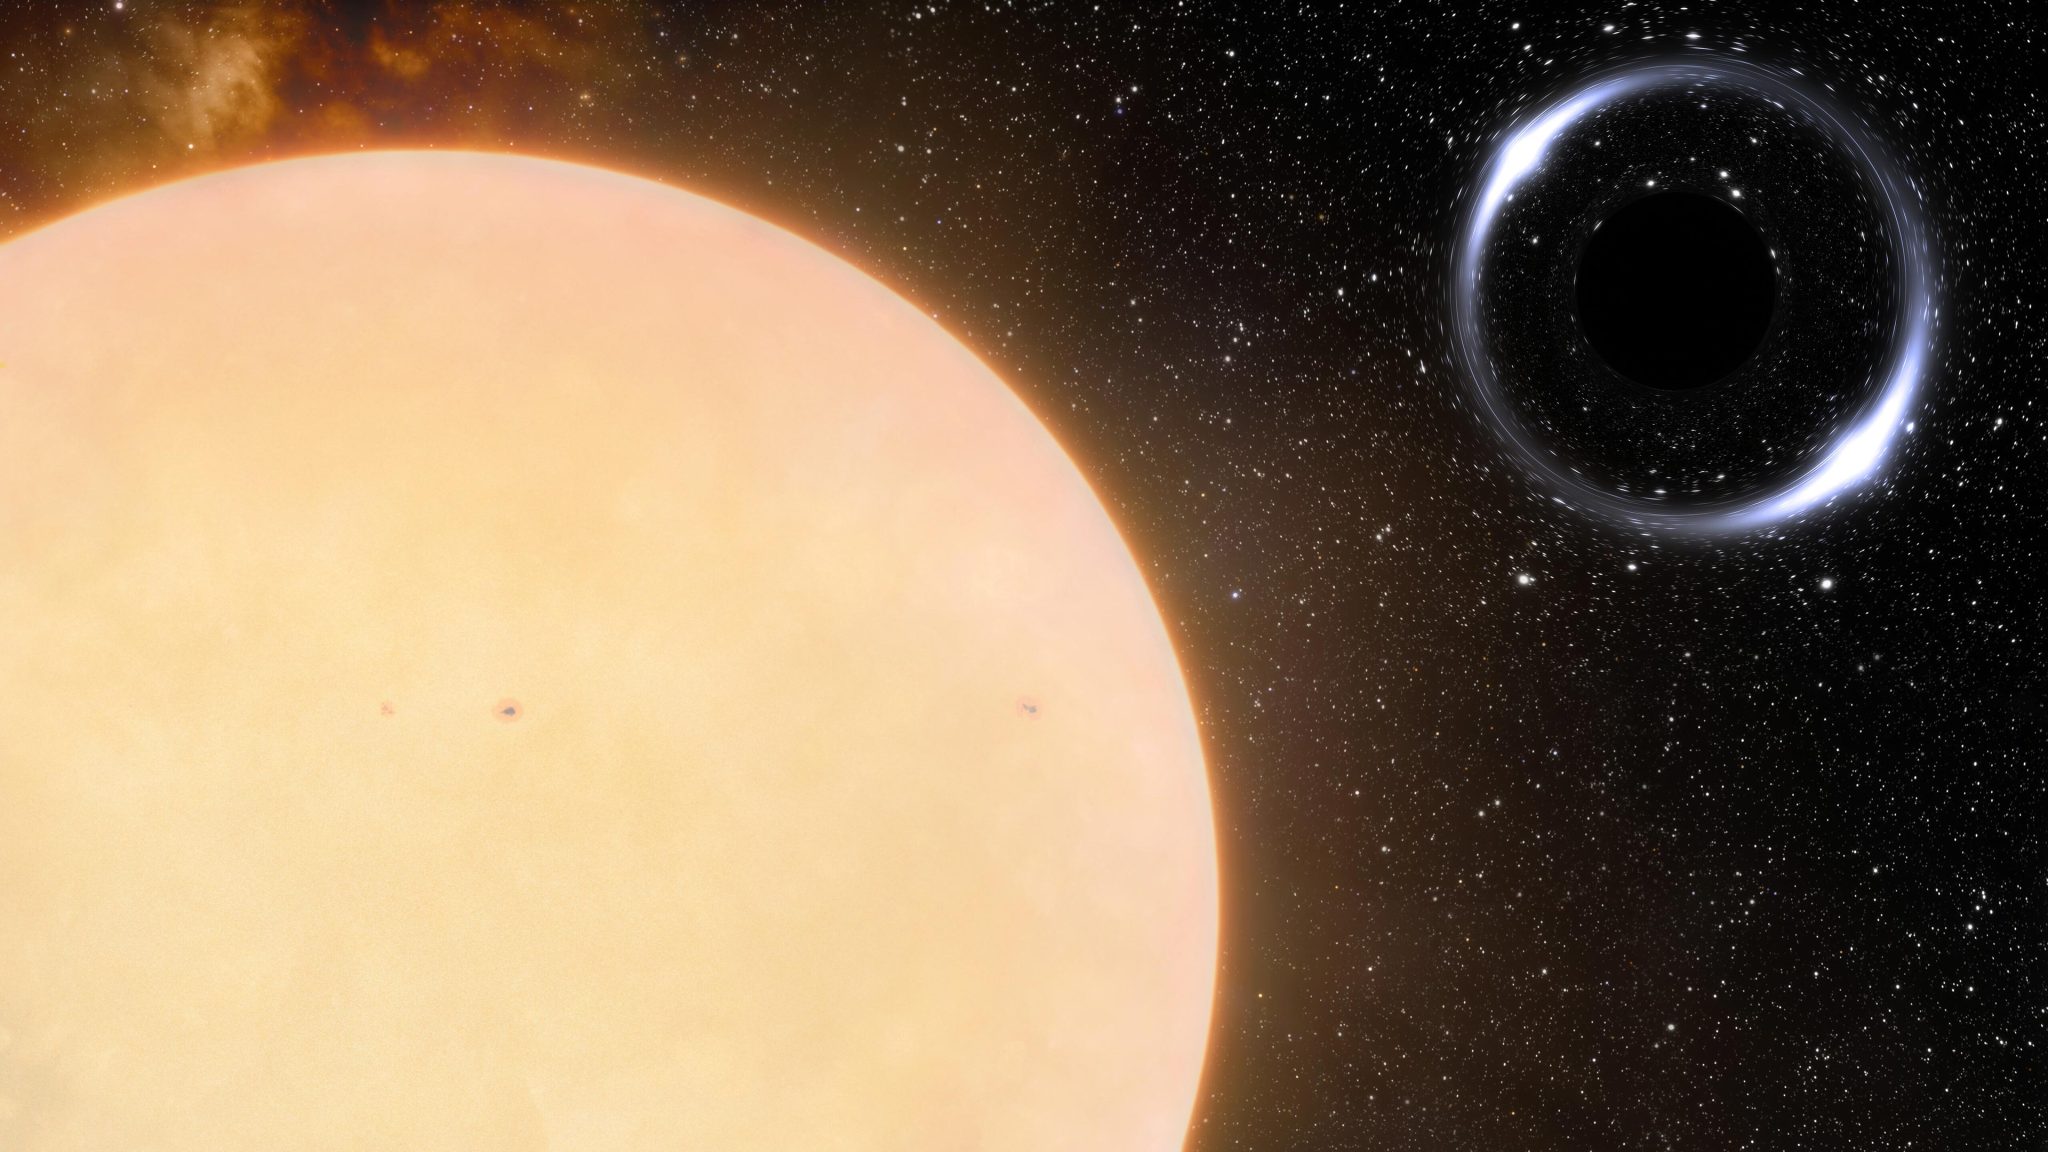 An artist's impression of the closest black hole to Earth and its sun-like star